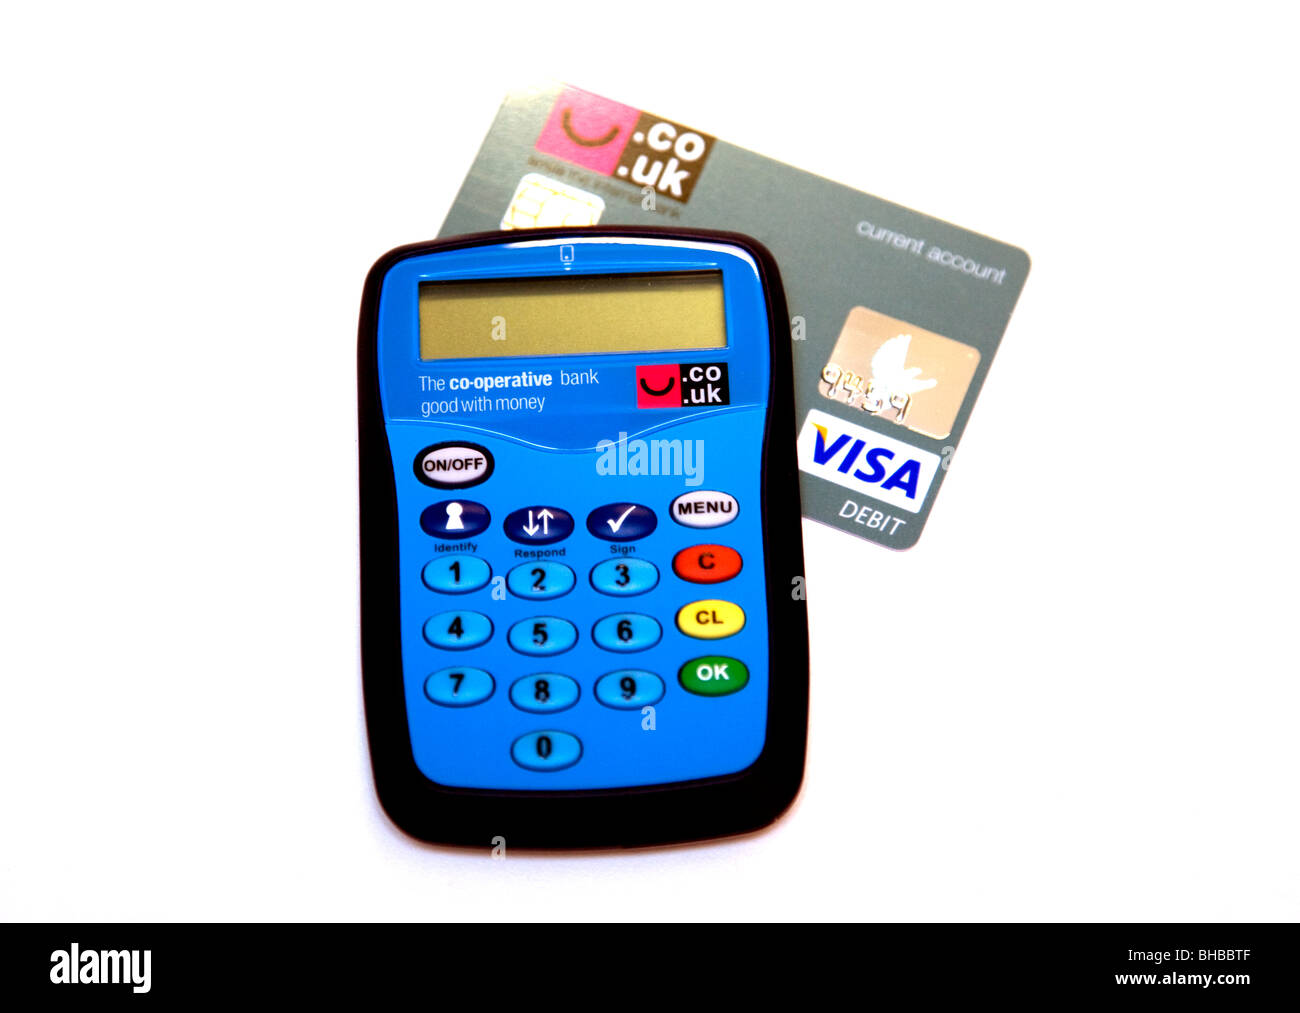 Bank card reader for secure Internet banking at home Stock Photo